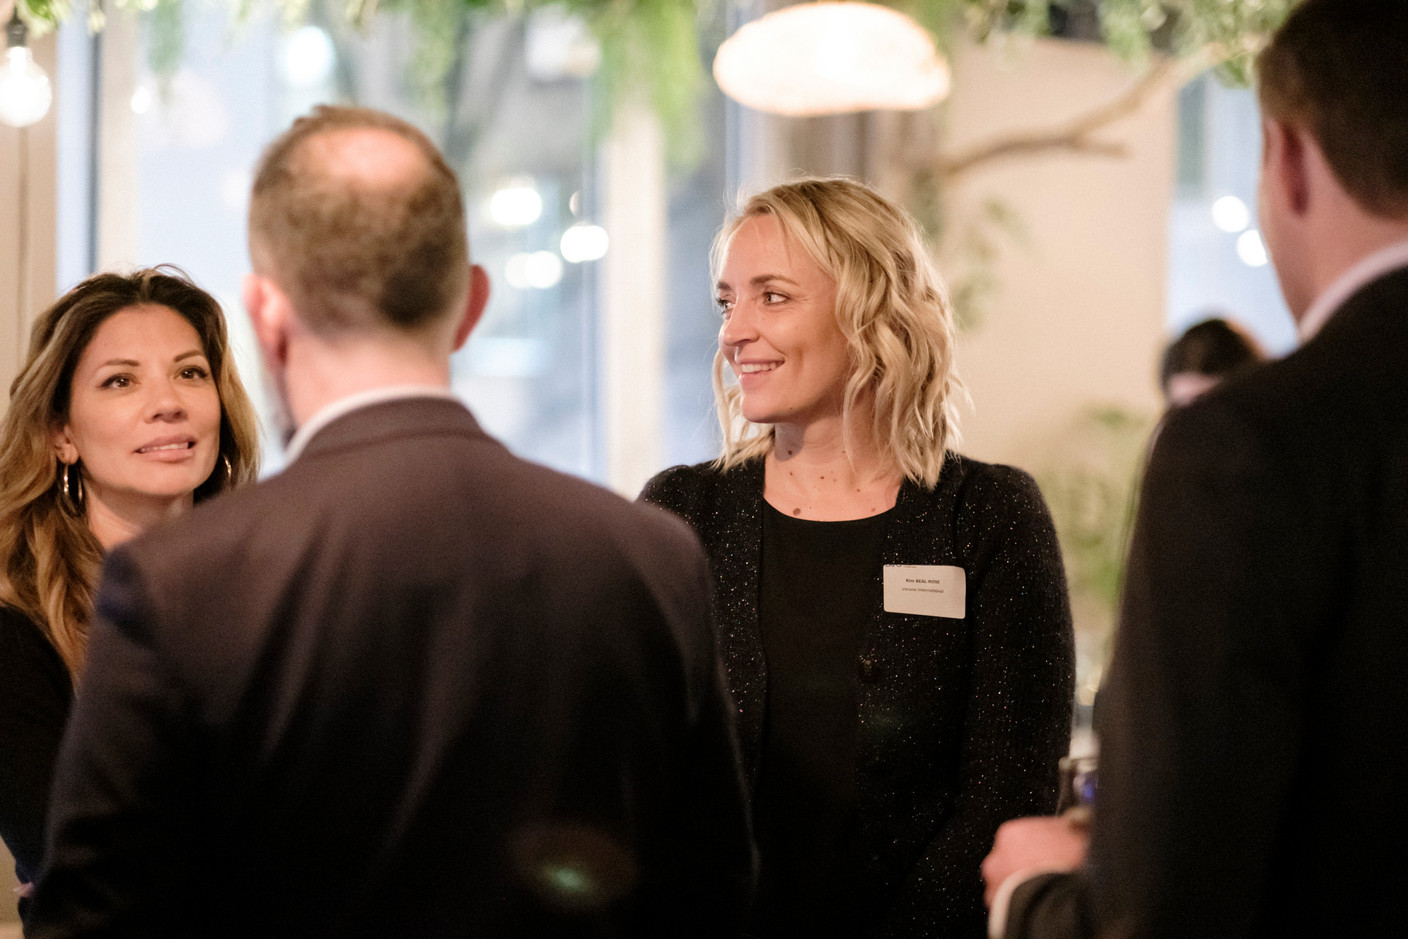 Kim Beal-Rose (Verona International) at the Luxembourg Association of Family Offices (LAFO) winter 2023 cocktail, which took place on 8 February 2023 at Hertz PopUp. Photo: Jan Hanrion for LAFO